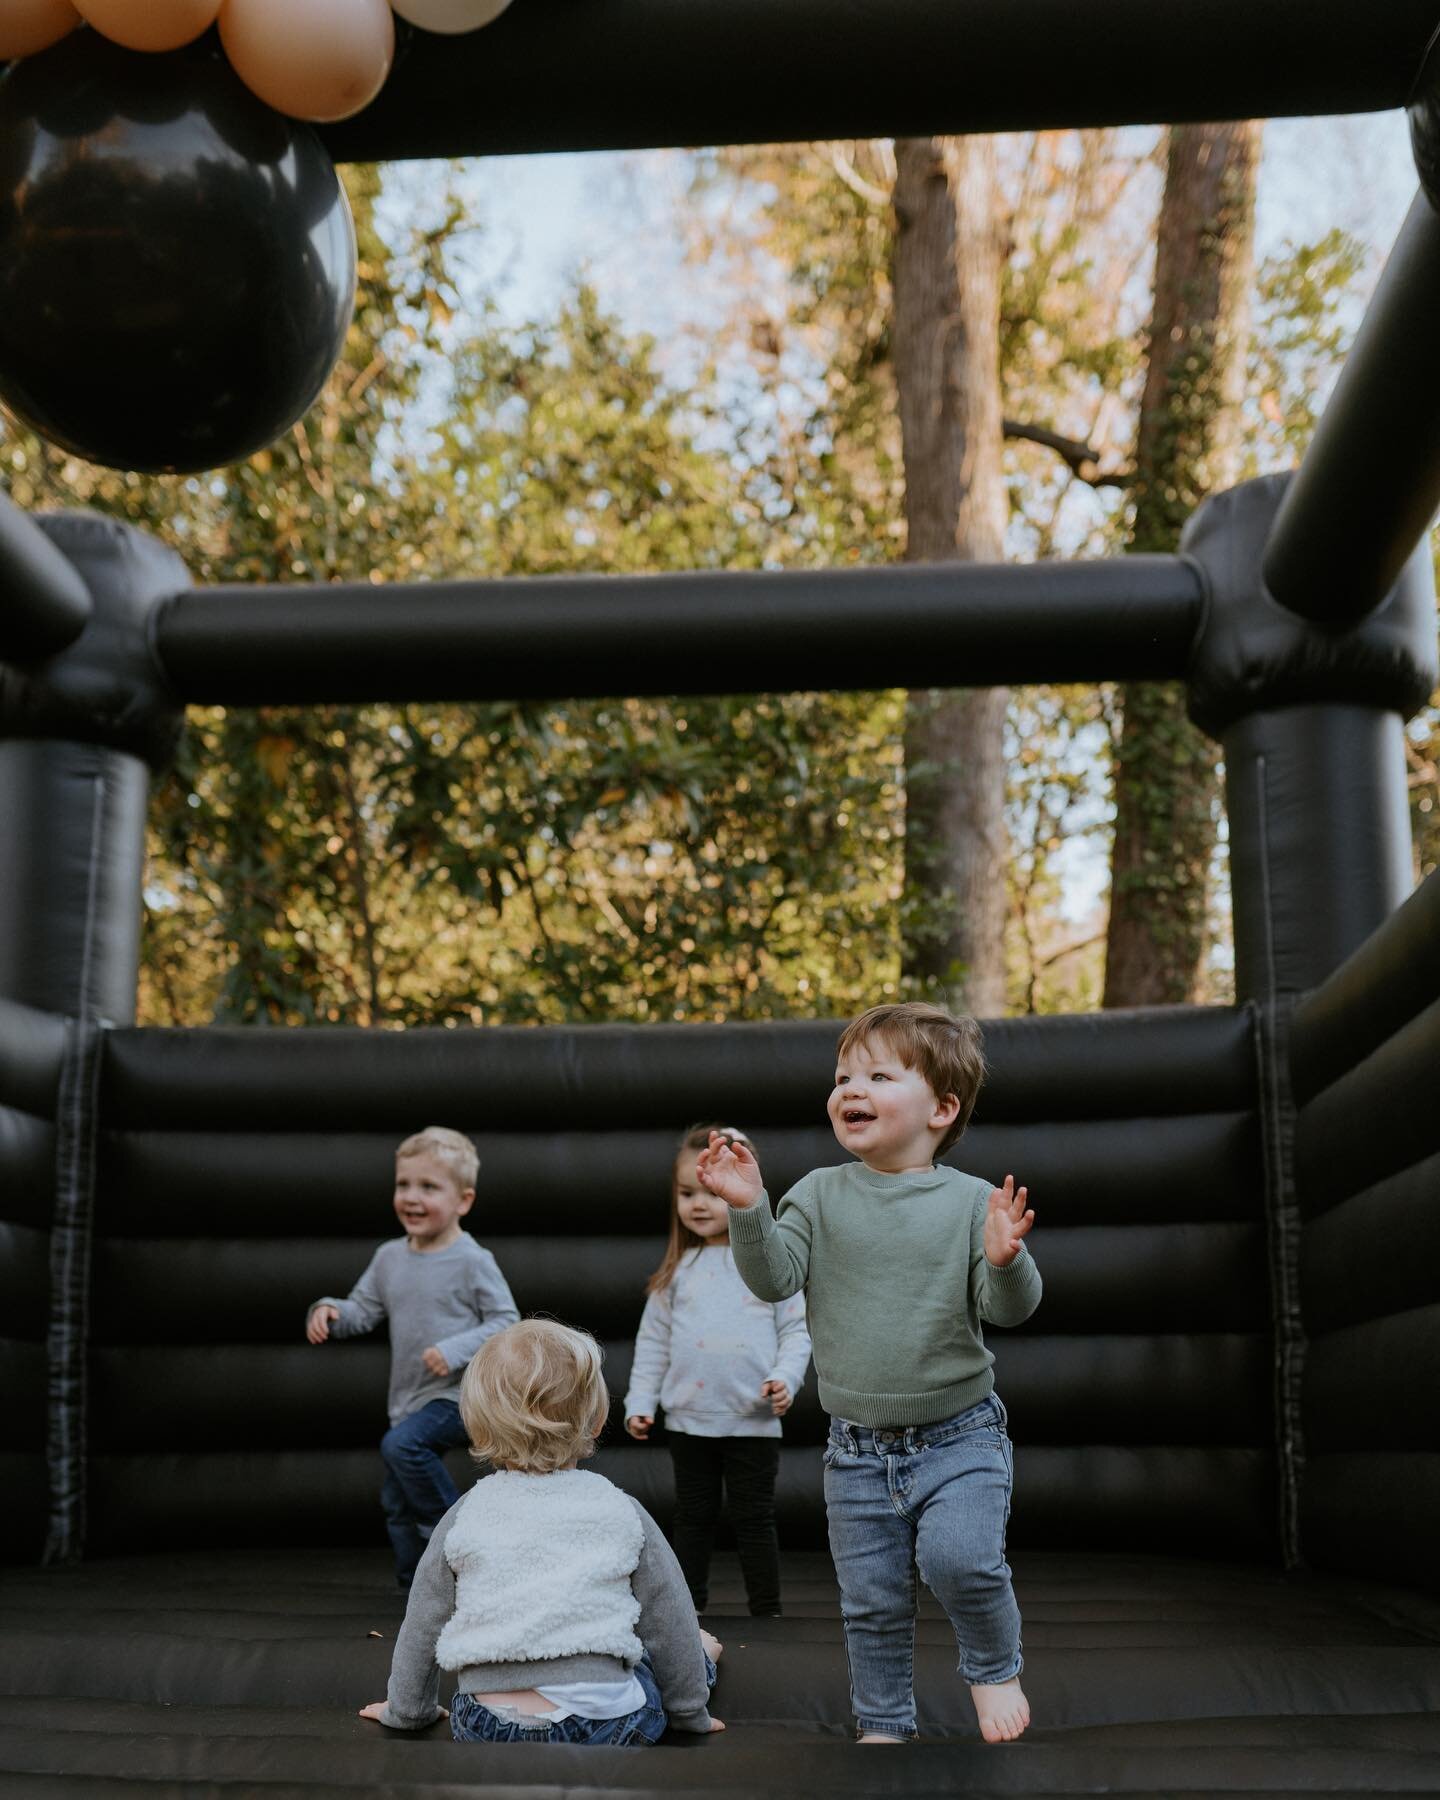 Fall bounces give us all the moody feelings. 😍 As much as we love our summer season - we&rsquo;re ready for some cooler weather and our black bounce to be at it again! 

Now is the time to think ahead to all fall events and book your bounce + ball p